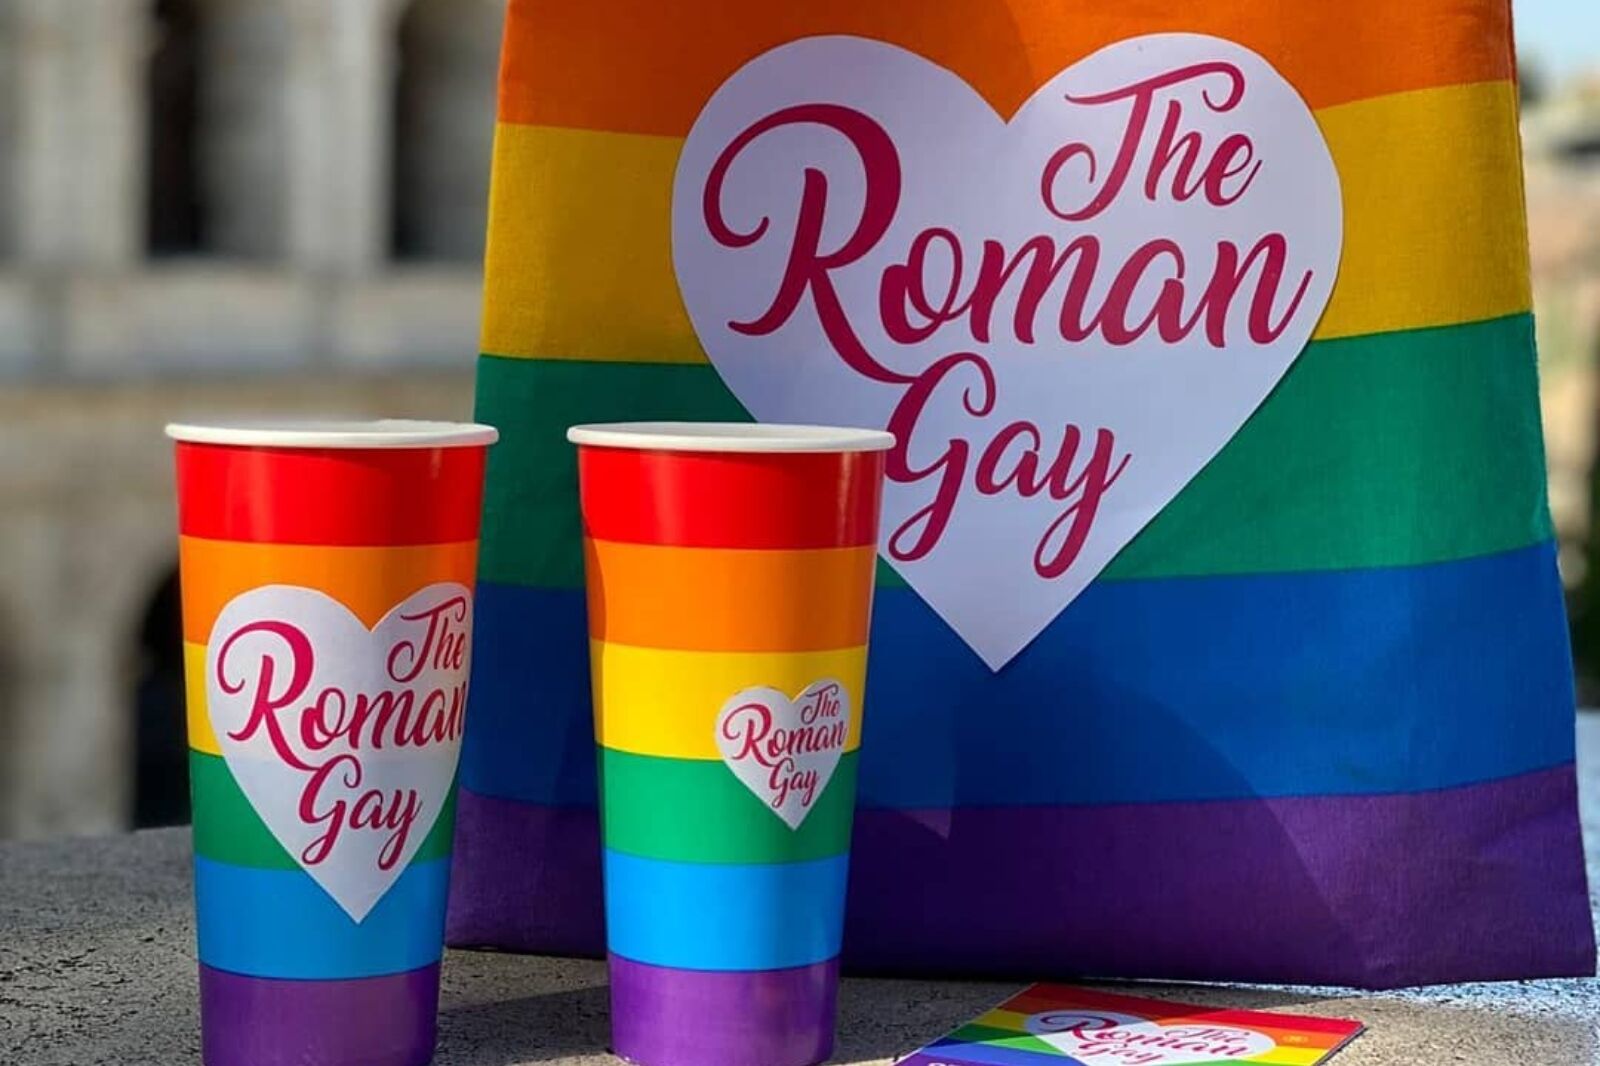 Merchandise from tour group in gay Rome